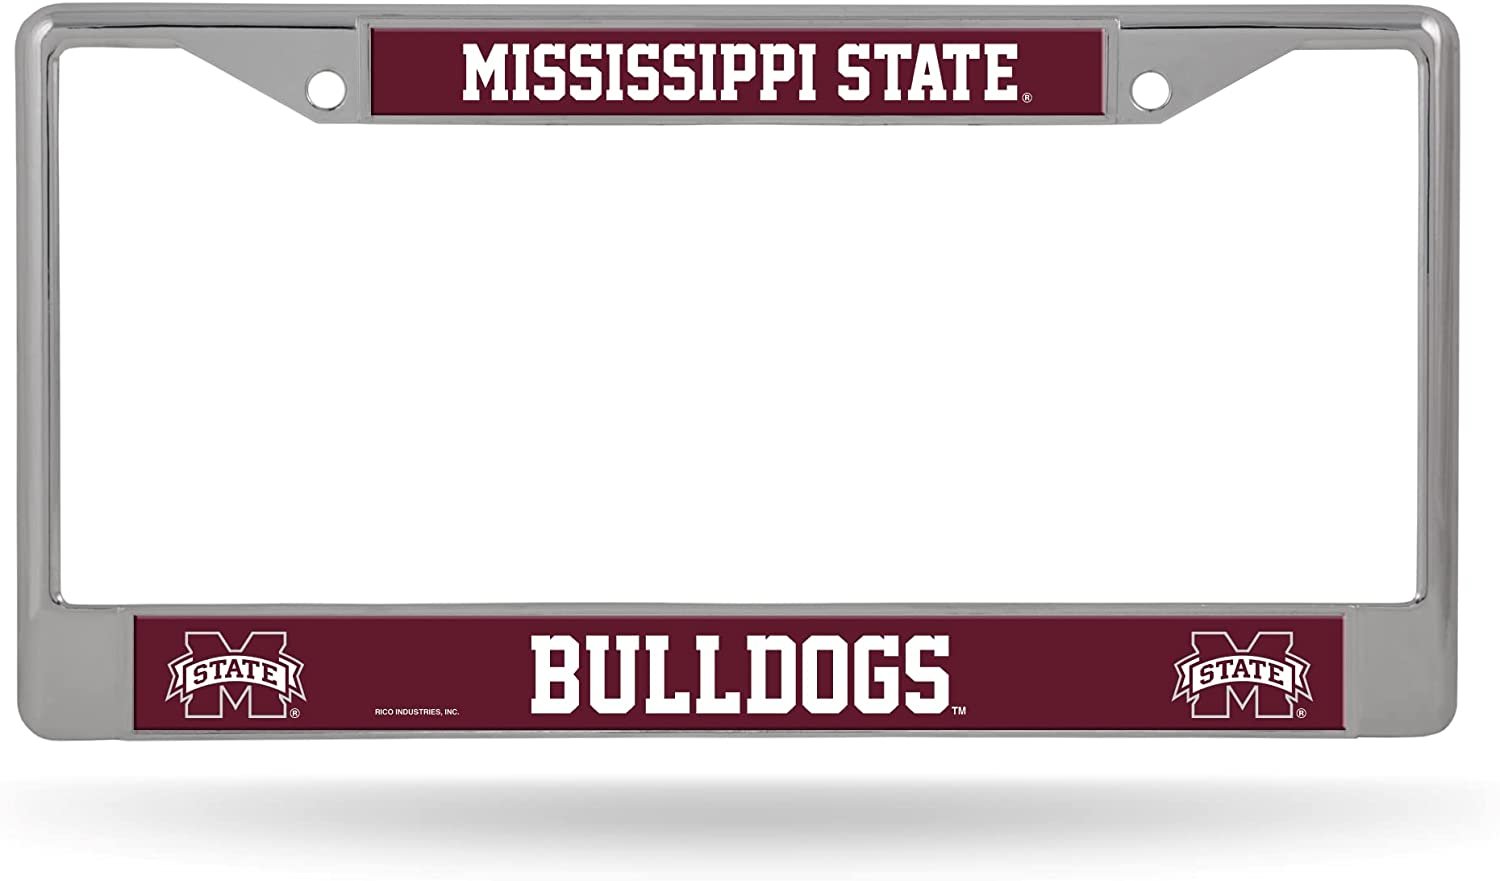 Mississippi State Bulldogs Metal License Plate Frame Tag Cover University